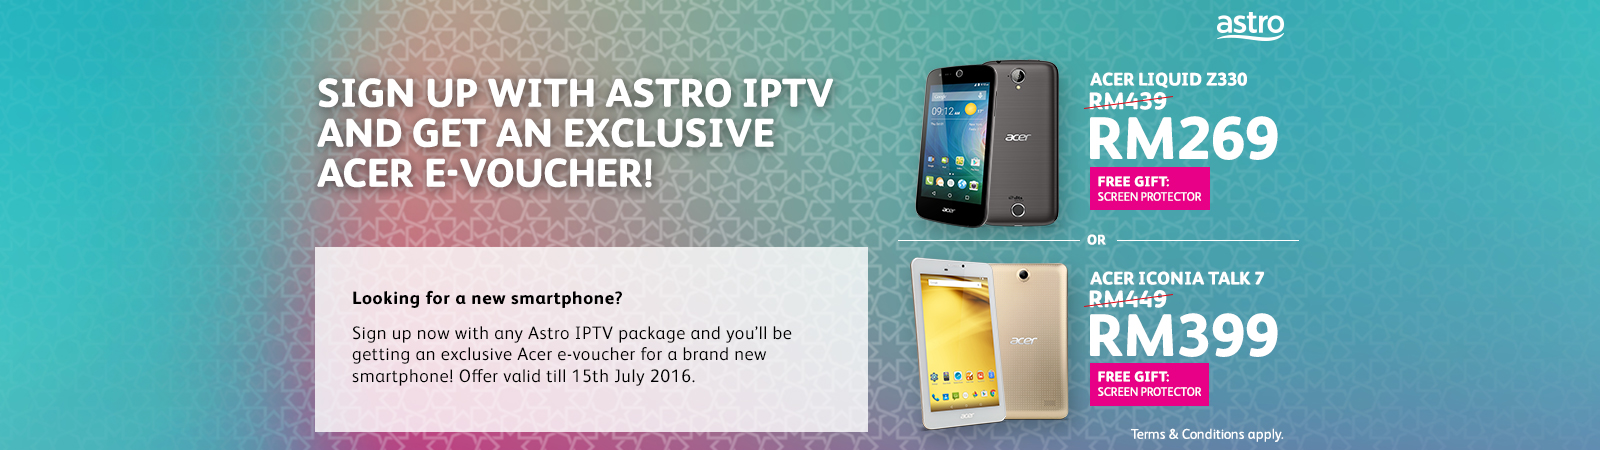 Get exclusive deals on Acer products when subscribing to Astro IPTV! 32